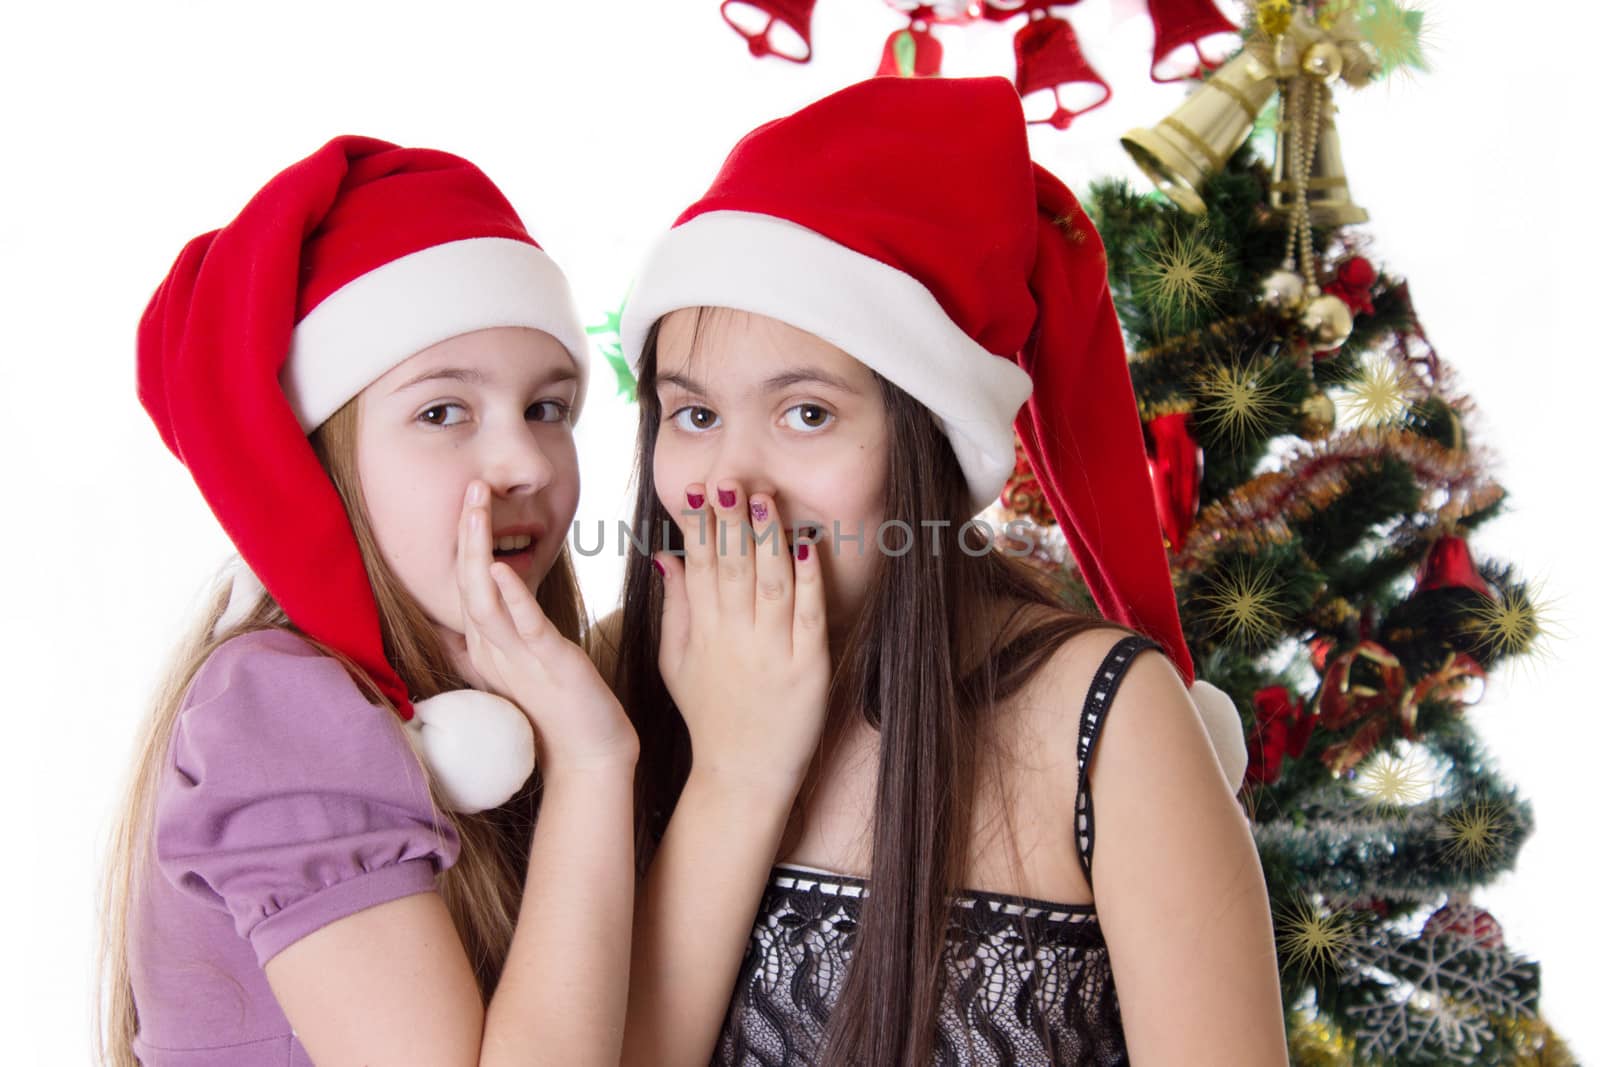 Girls sharing each other secrets on Christmas Eve by Angel_a